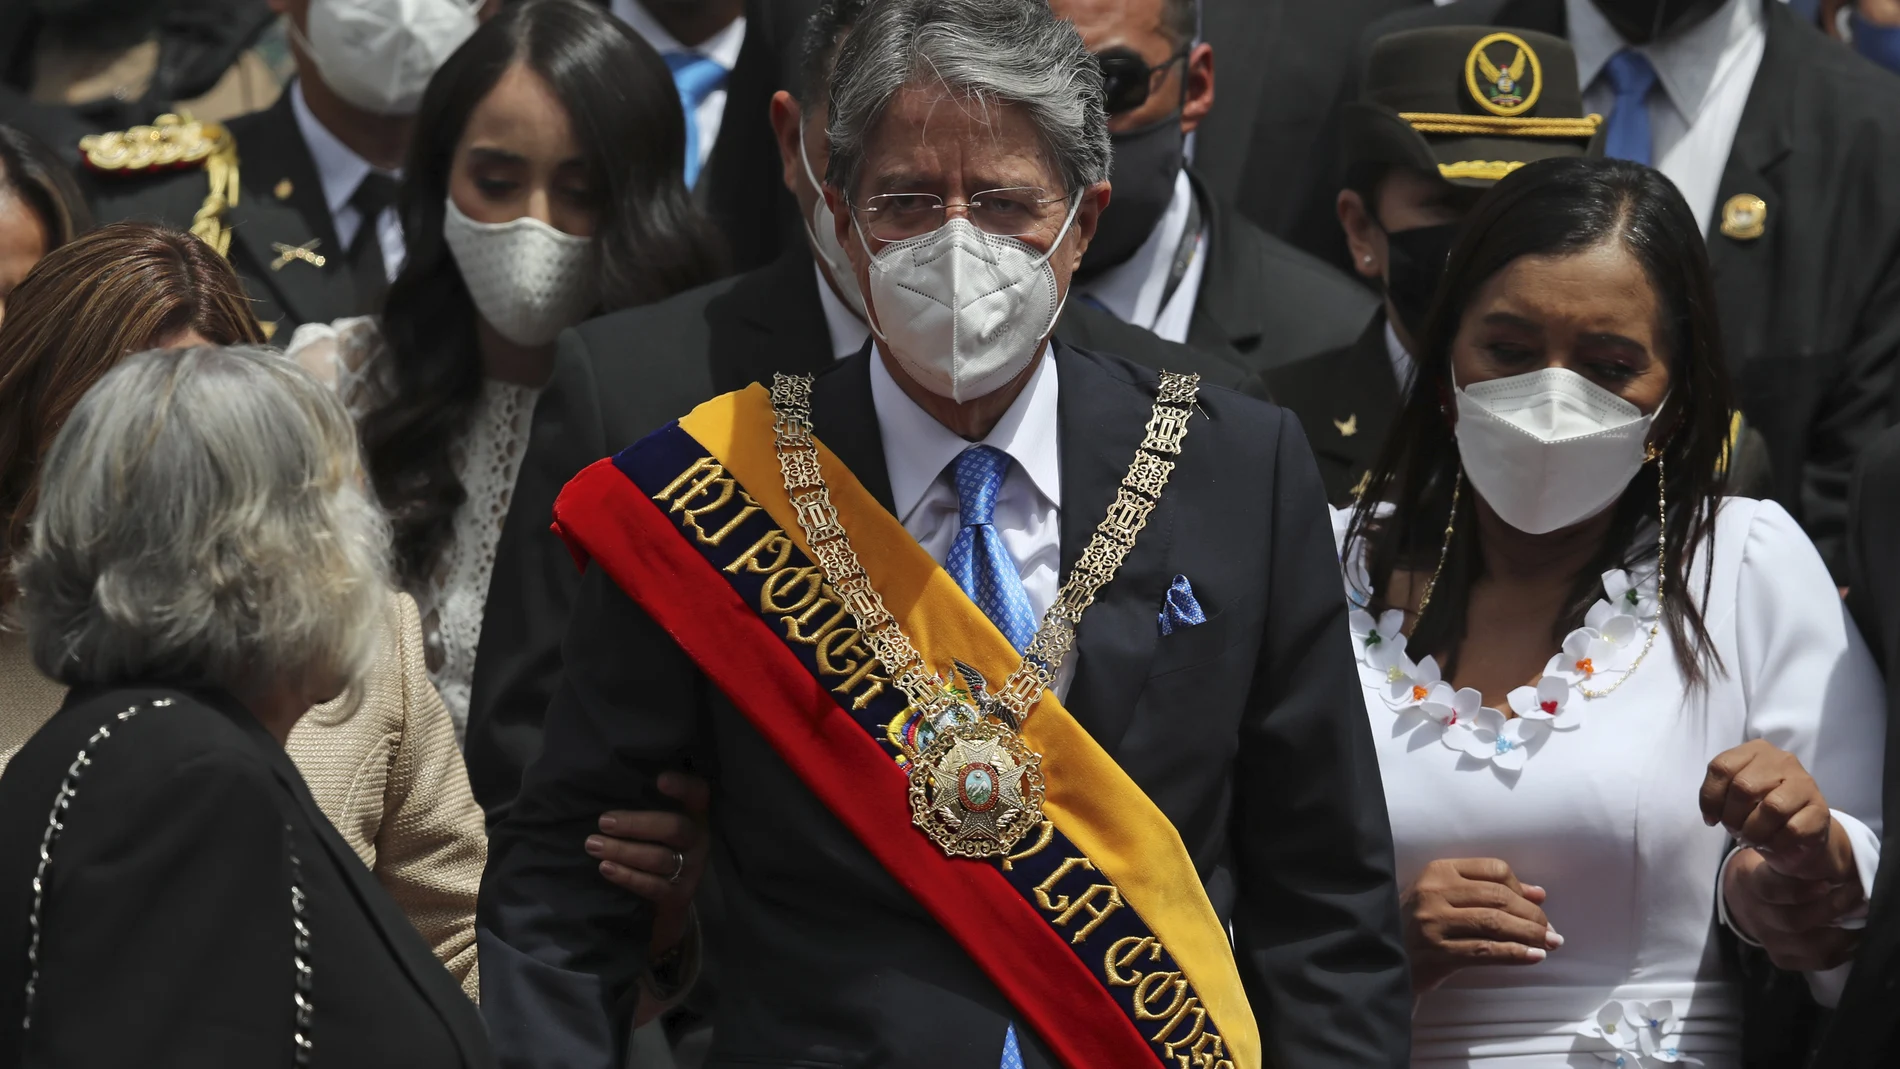 Ecuador's new President Guillermo Lasso wears the presidential sash after his inauguration ceremony as he exits the National Assembly with his wife Maria de Lourdes, partially covered left, and daughter Maria Mercedes, second from left, in Quito, Ecuador, Monday, May 24, 2021. At right is National Assembly President Guadalupe Llora. (AP Photo/Dolores Ochoa)